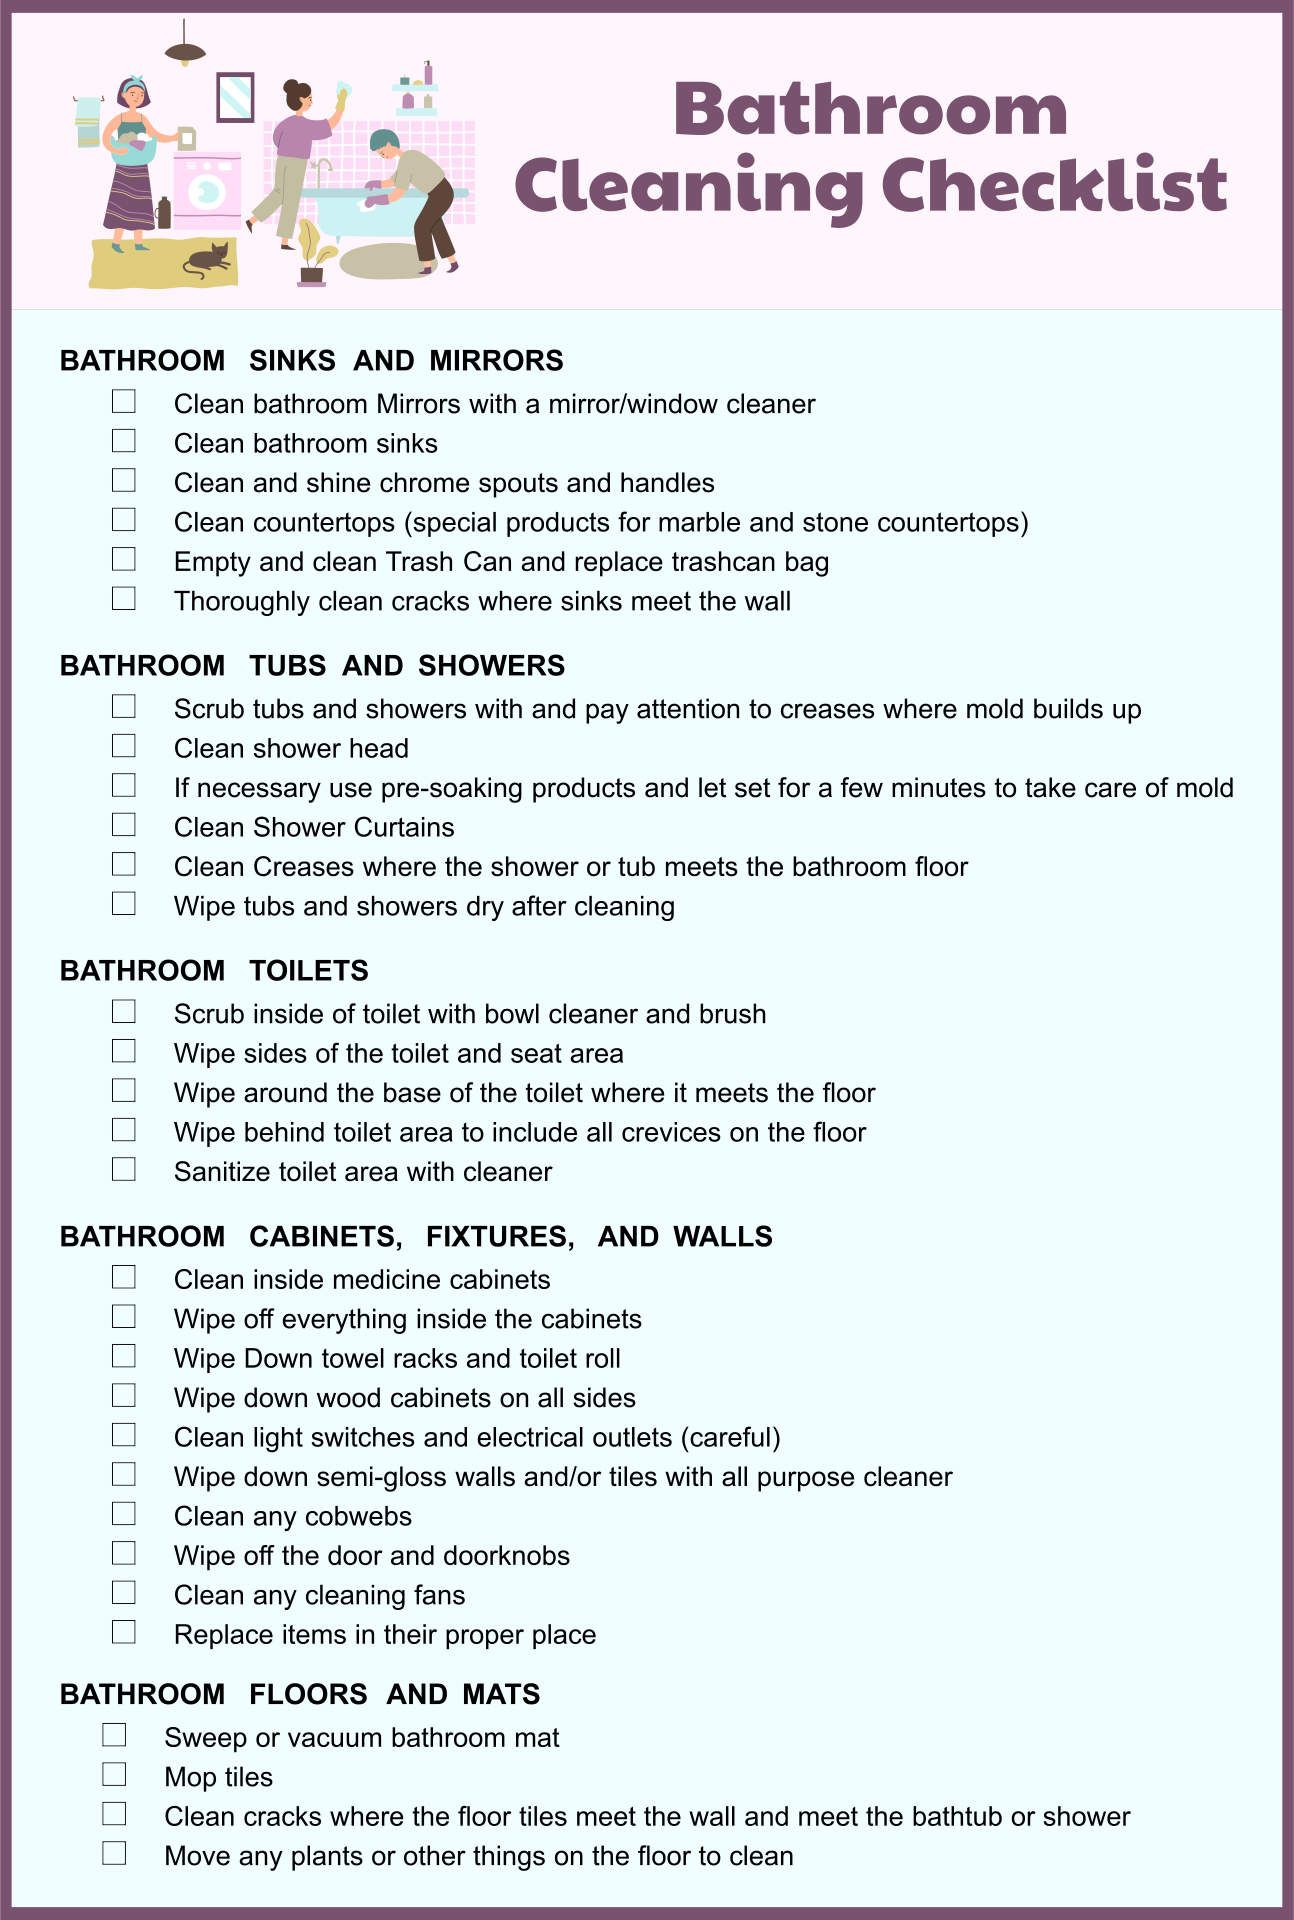 8-best-images-of-restroom-cleaning-schedule-printable-daily-bathroom-cleaning-checklist-free